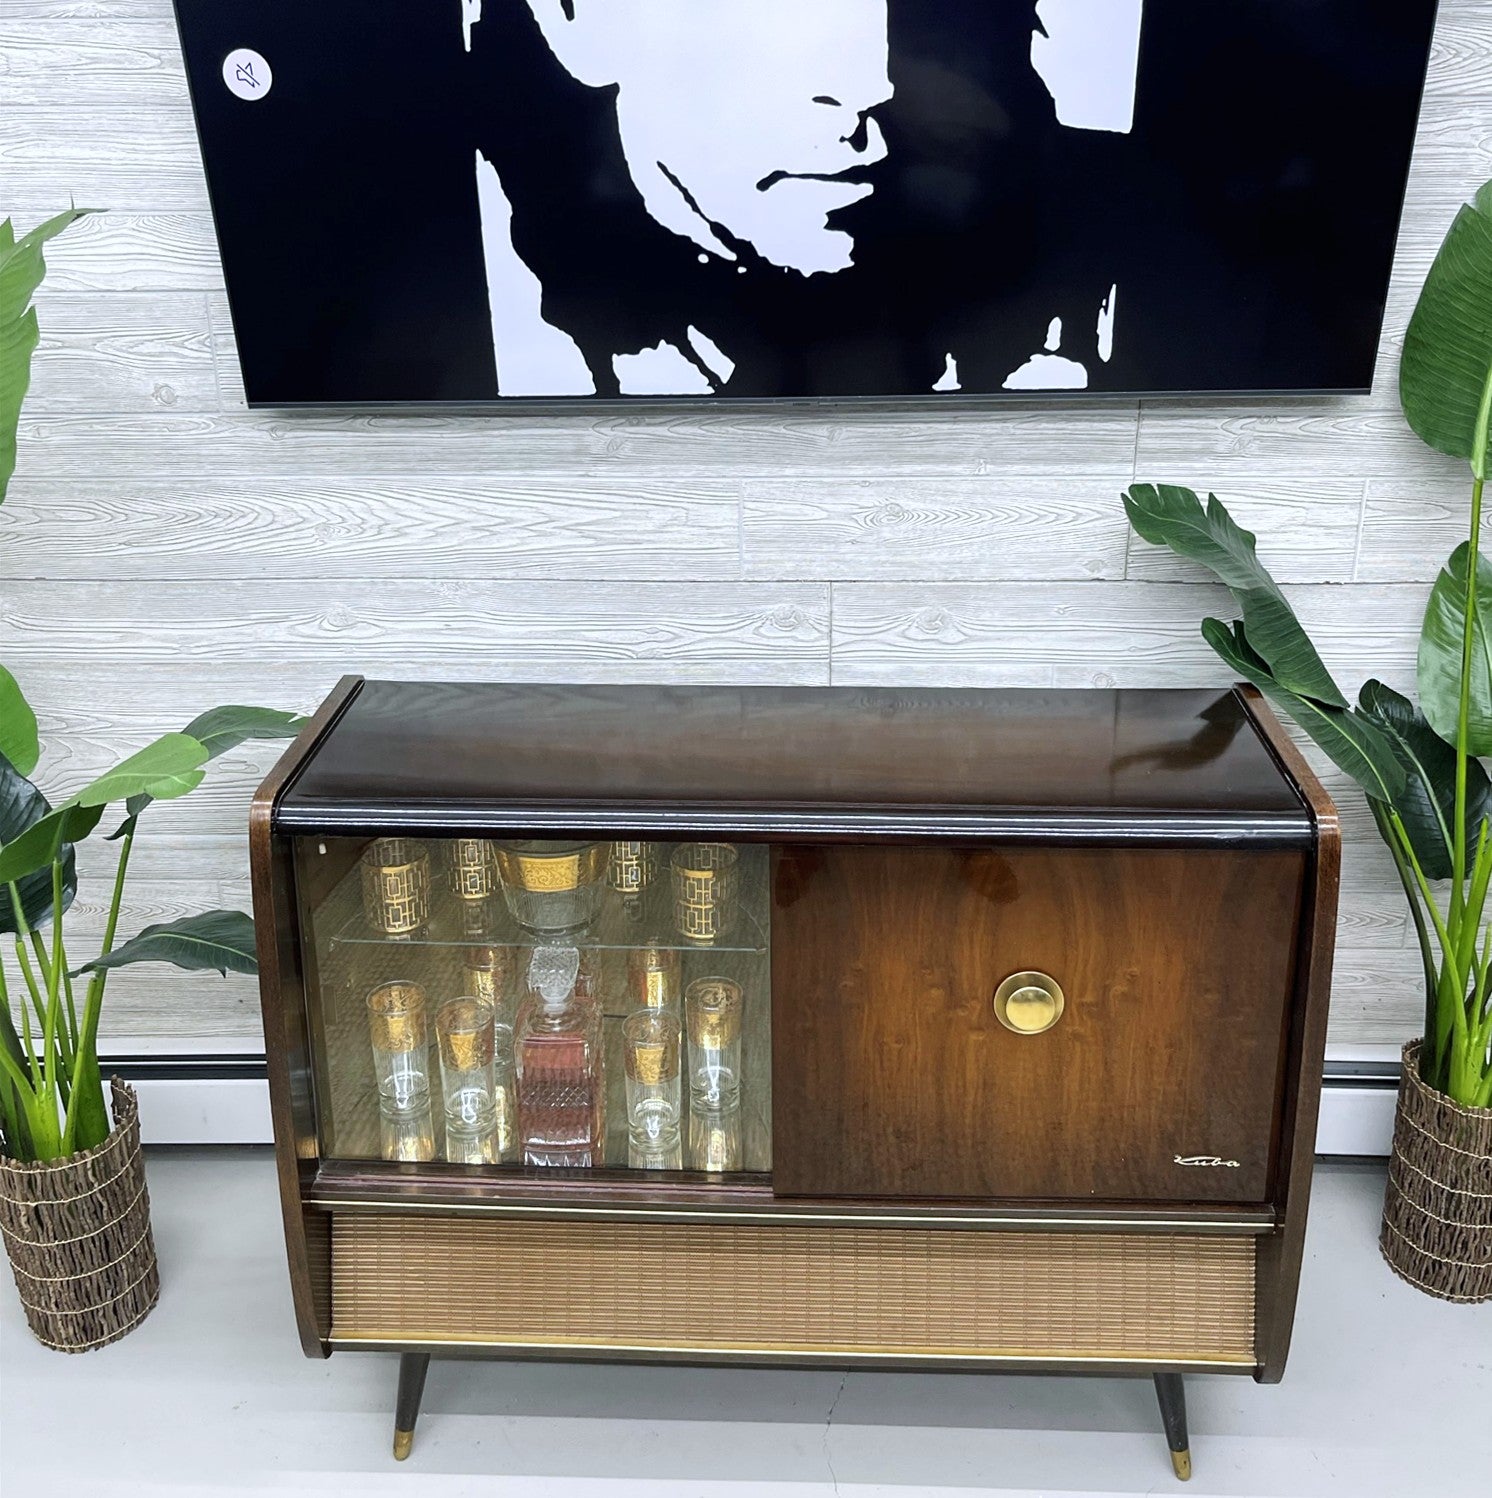 SOLD OUT!!! KUBA 50s Mid Century Stereo Console Record Player Changer w/Whiskey Bar Cabinet - AM FM Bluetooth Alexa The Vintedge Co.